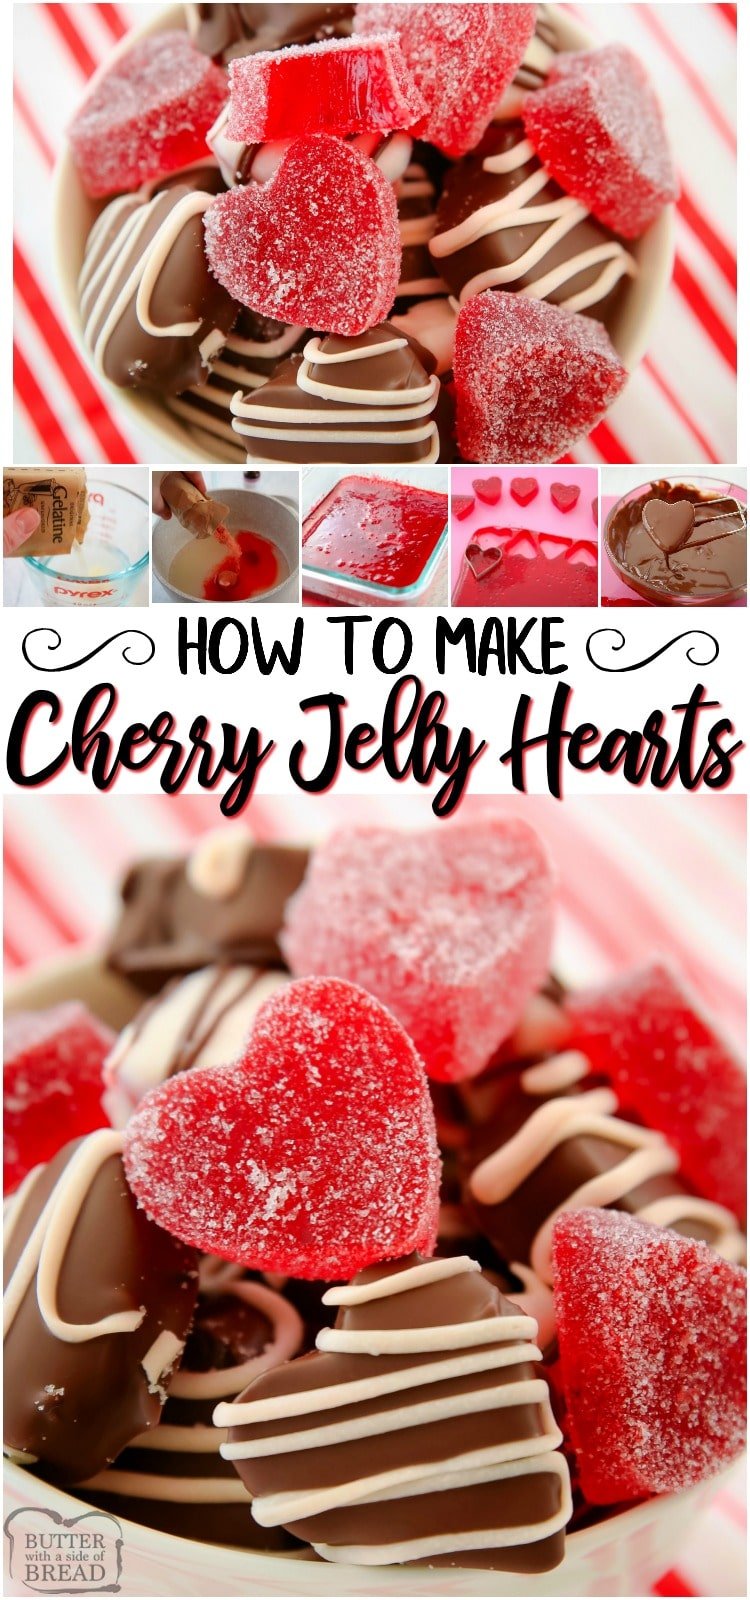 Cherry Jelly Hearts recipe for a fun & tasty take on popular jelly heart candy! Jelly Candy covered in white or dark chocolate or sugar. Cute for Valentine's Day or anytime. #candy #jellycandy #jellyhearts #heartcandy #dessert #treats #Valentines #recipe from BUTTER WITH A SIDE OF BREAD